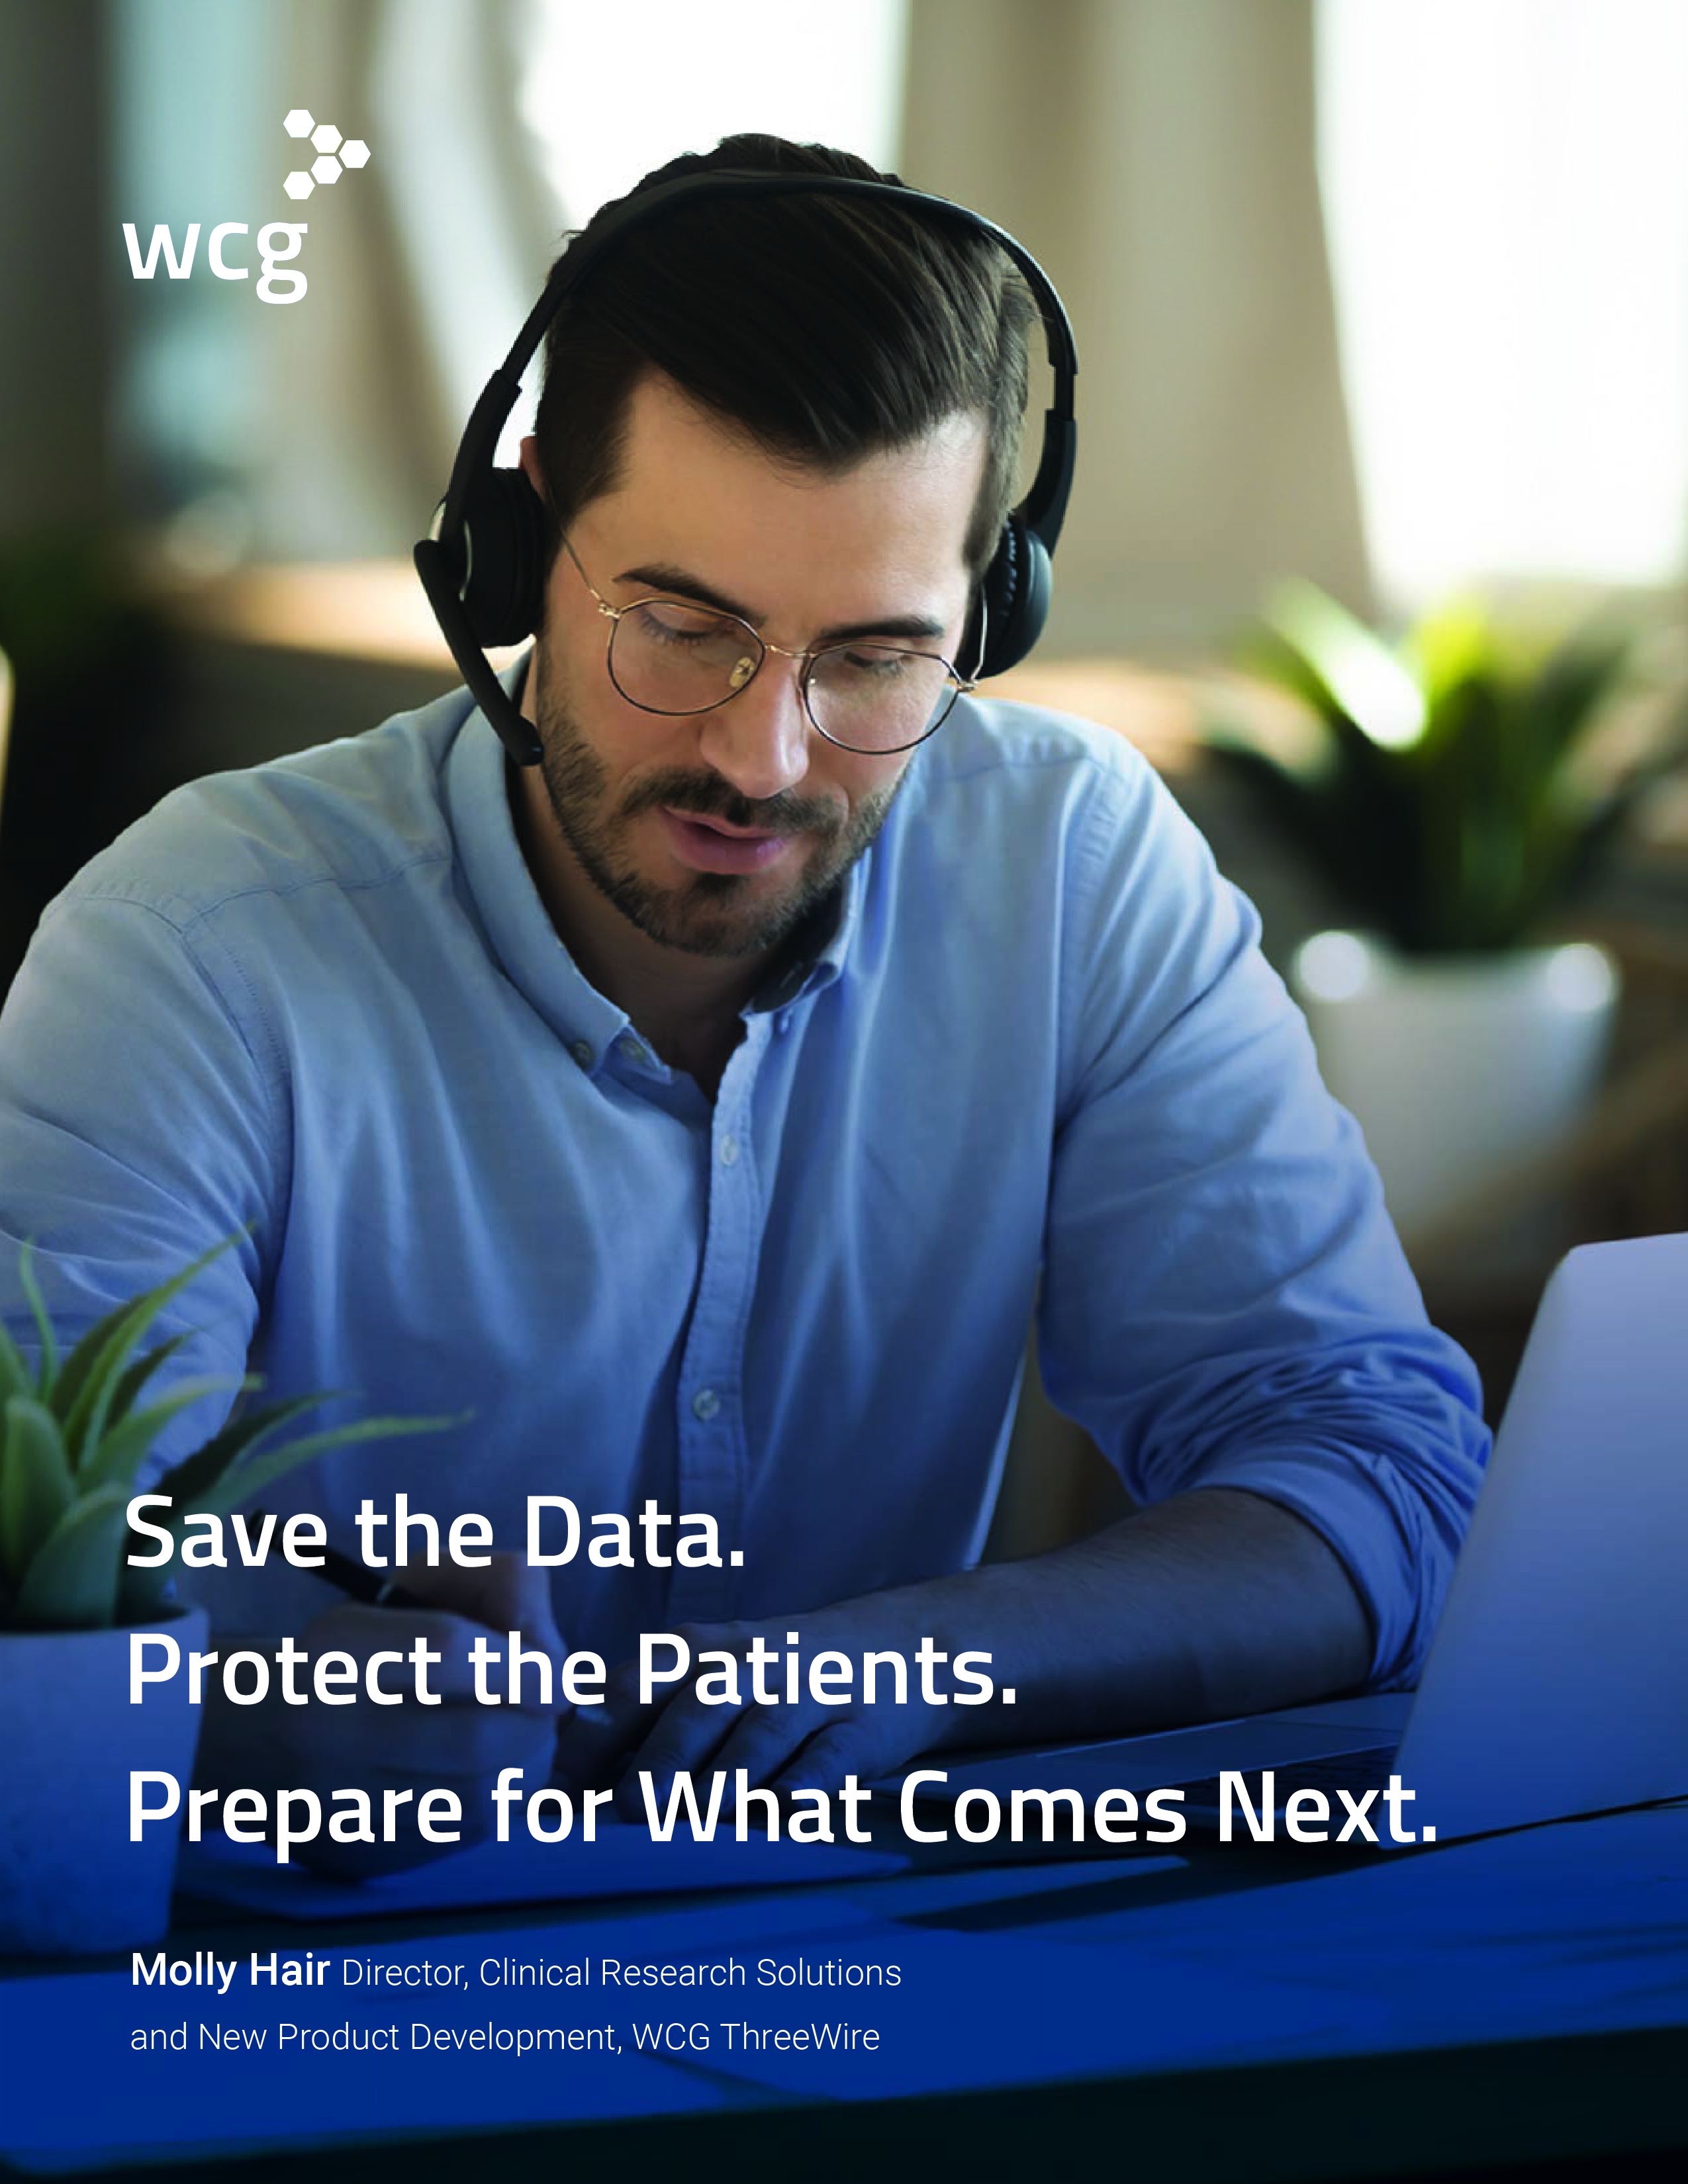 Save the Data. Protect the Patients. Prepare for What Comes Next.